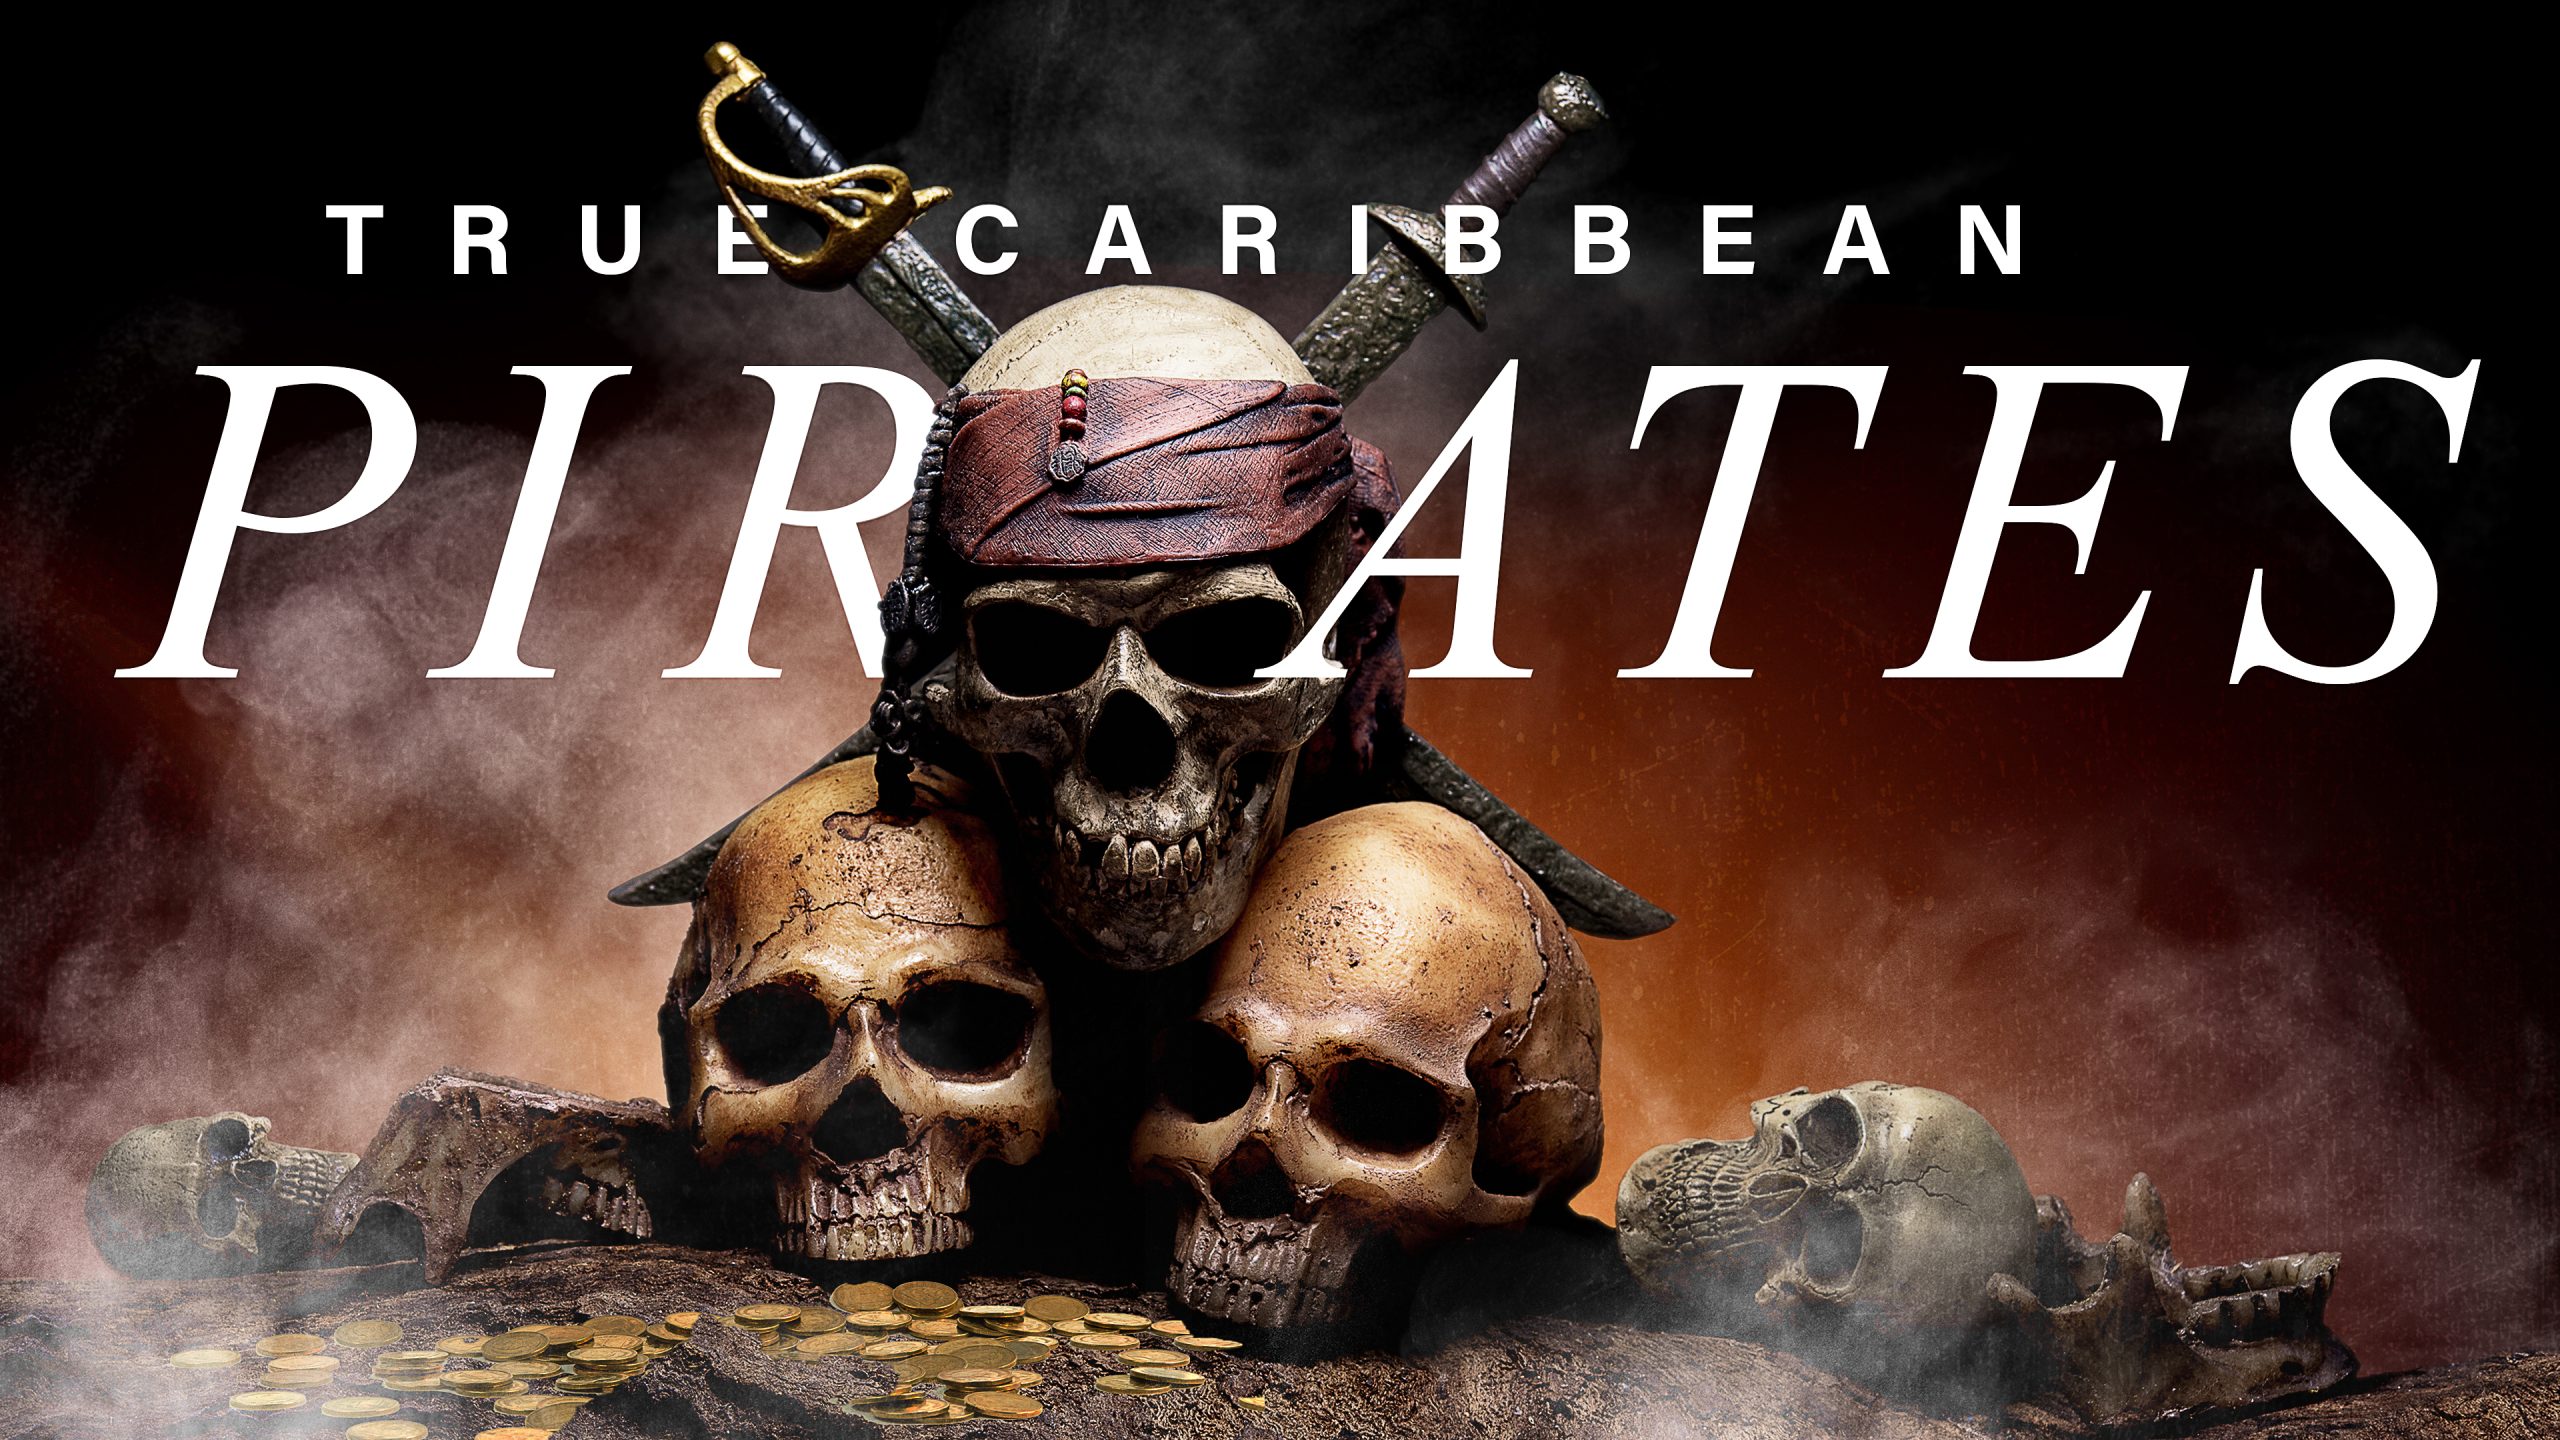 pirates of the caribbean 2 free to watch